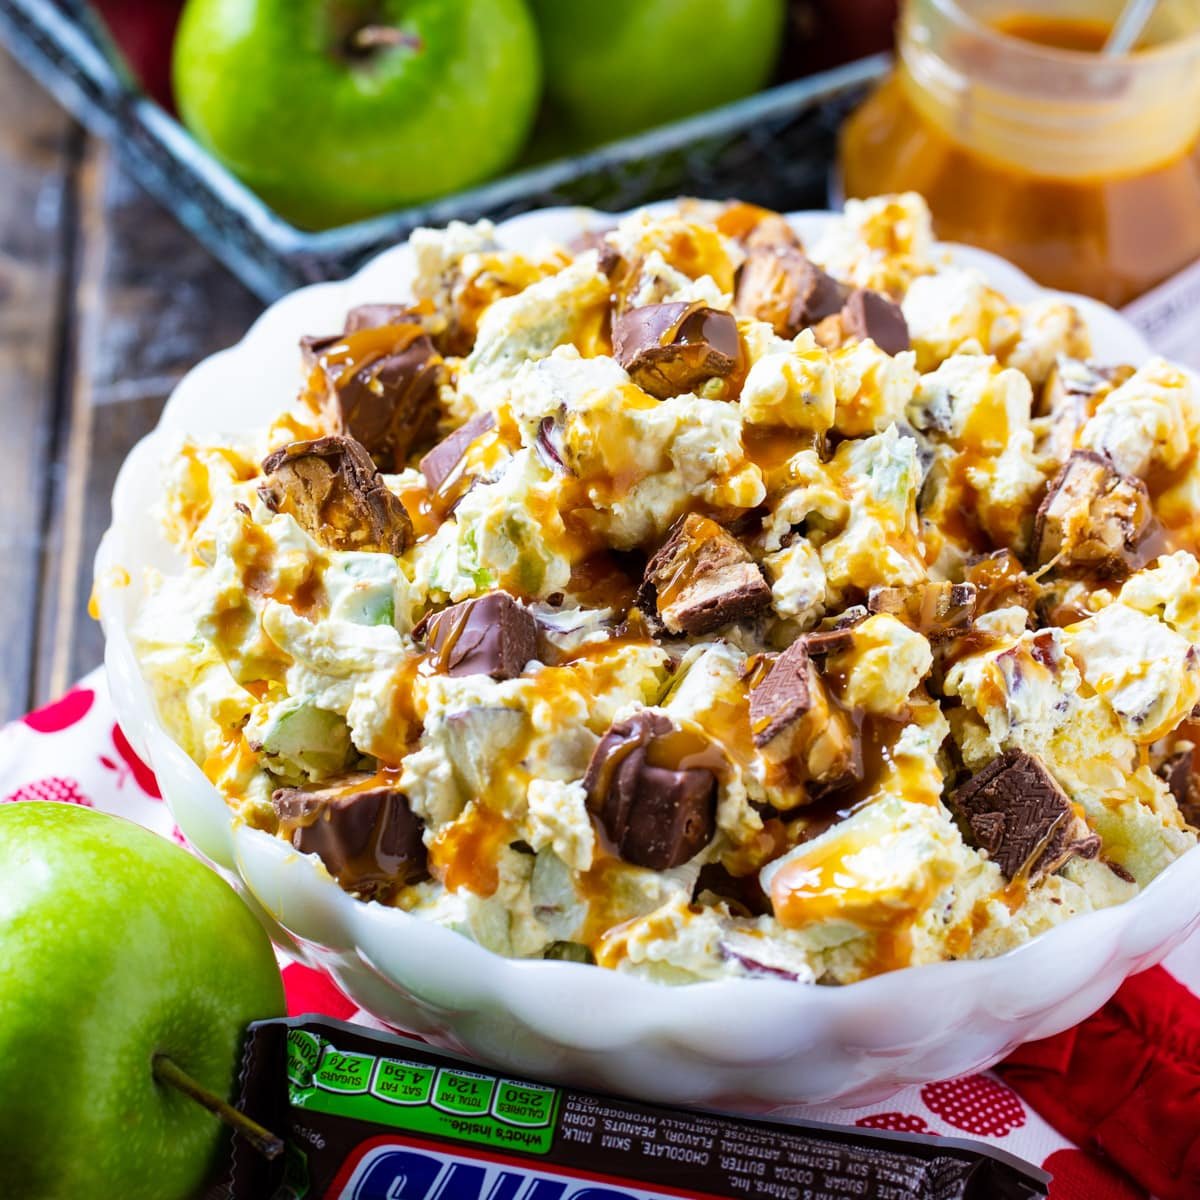 Snickers Caramel Apple Salad in a white serving bowl.